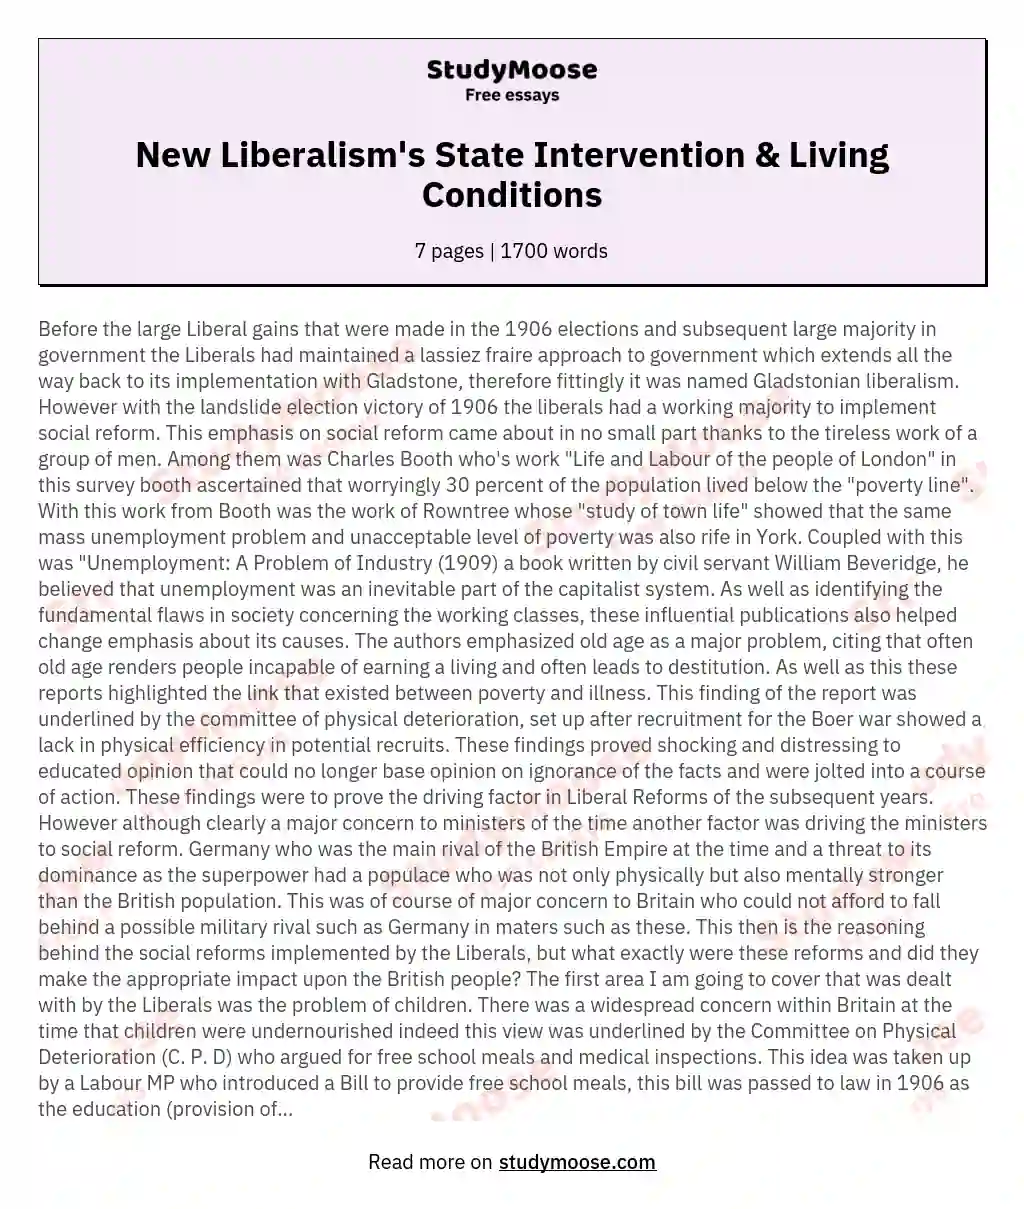 With what success did New Liberalism use state intervention to improve living conditions between 1906 and 1914?